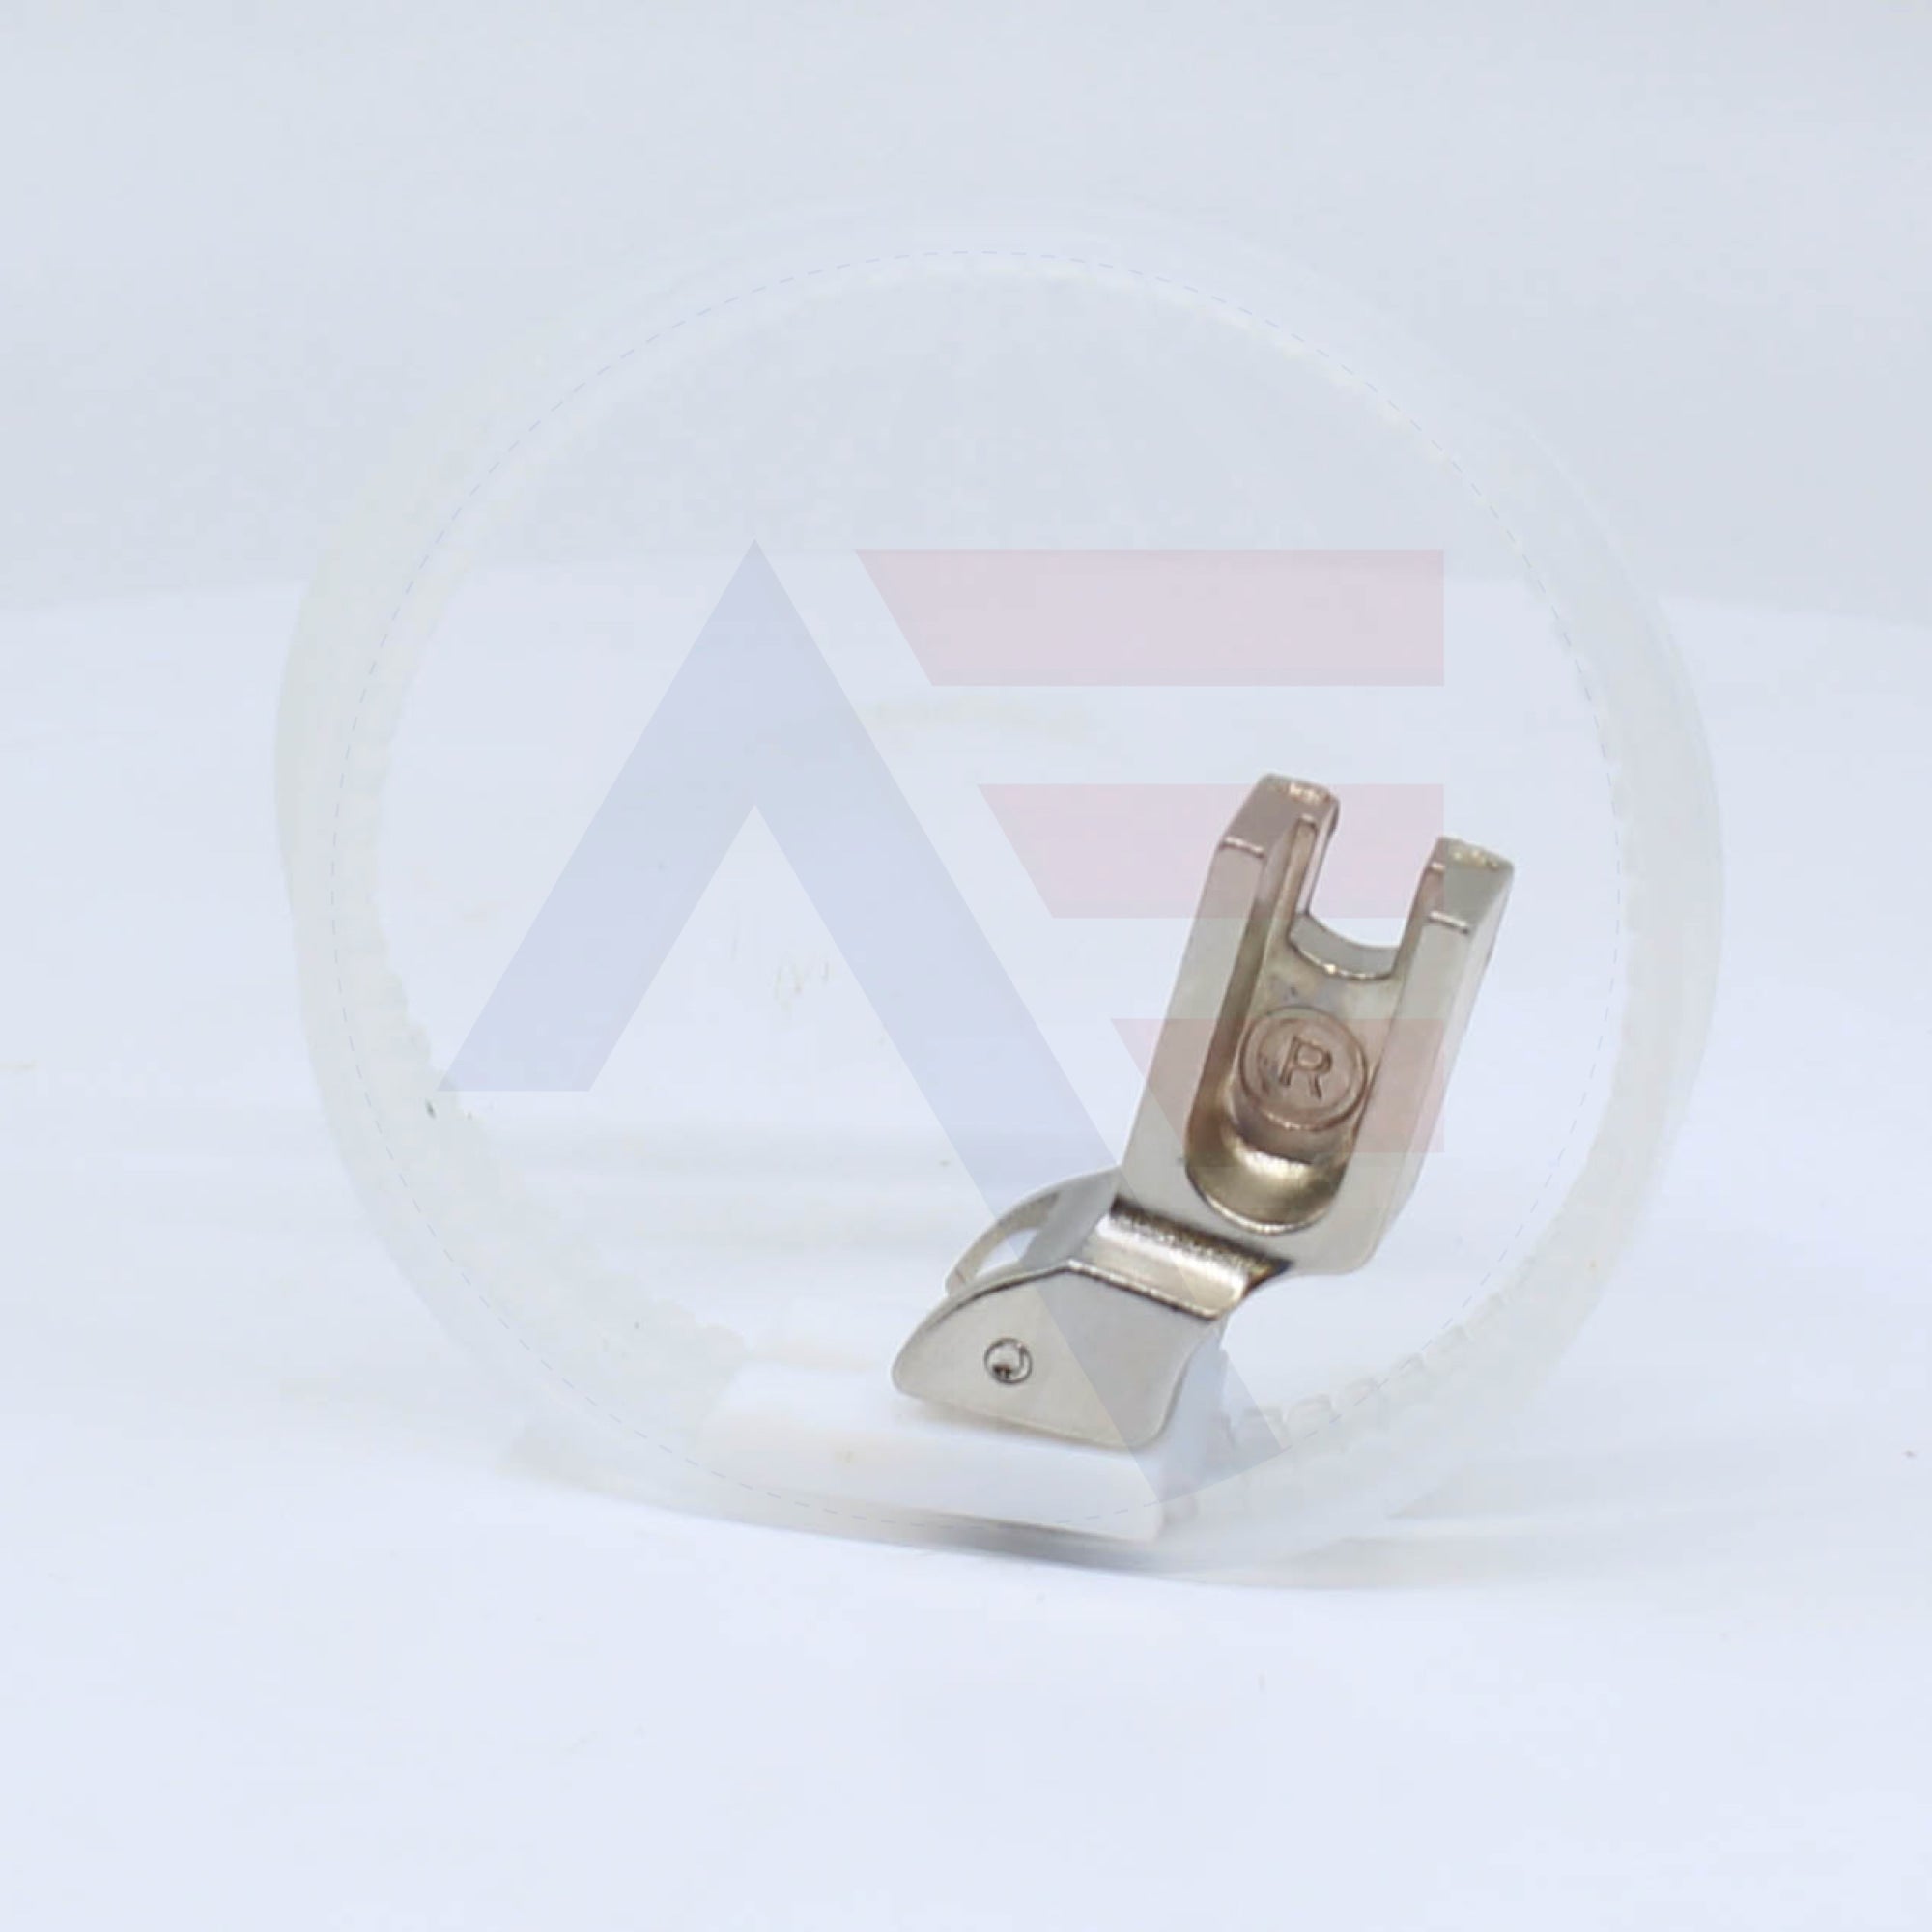 Trf-1 Nylon Ring Foot Sewing Machine Spare Parts